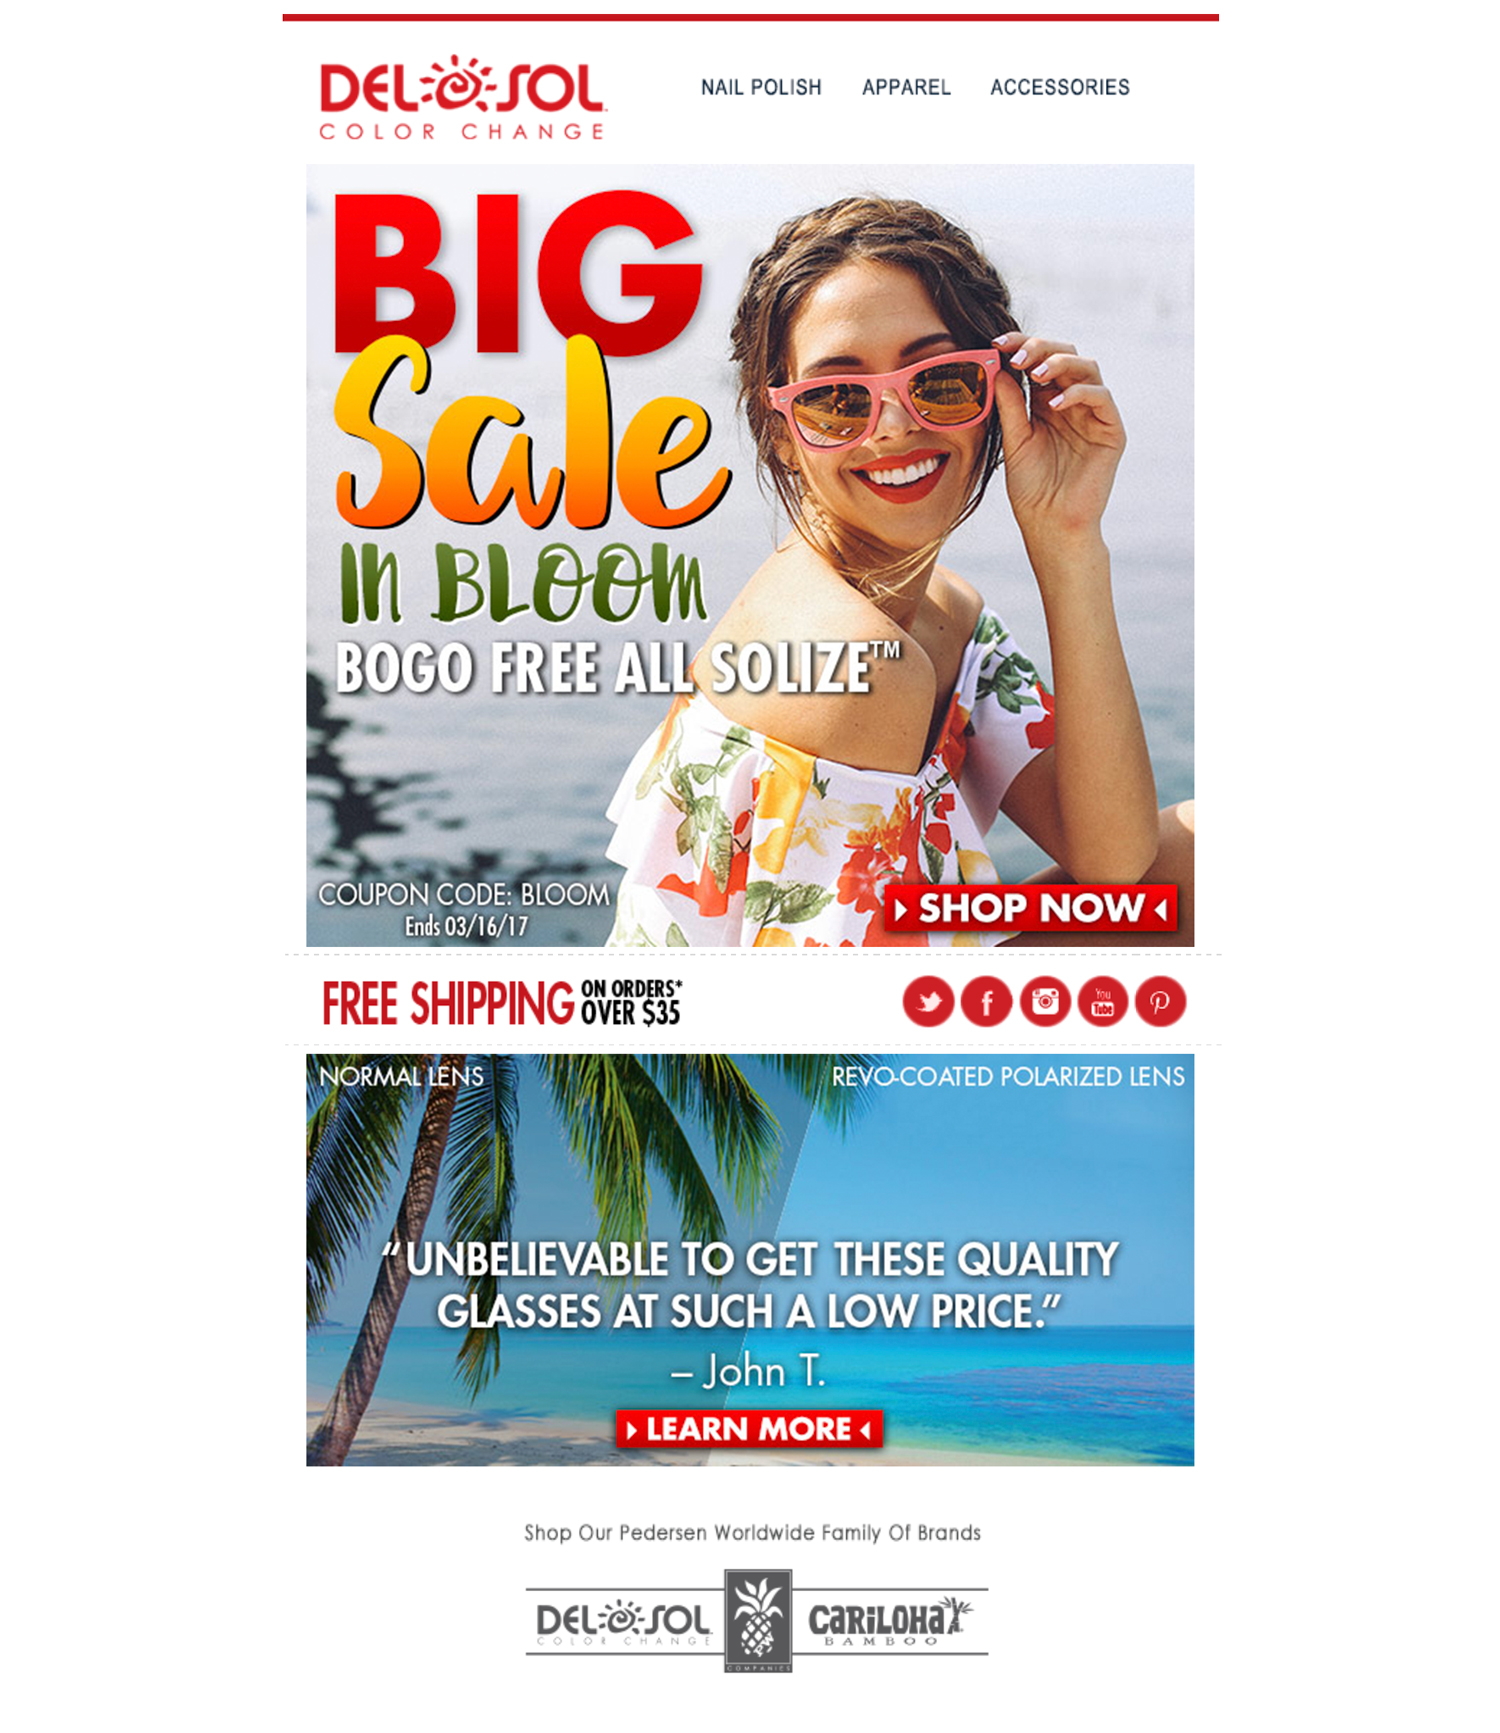 Designed Email Campaign to show off new Solize™ models while tying in with Del Sol's fun in the sun beach brand.